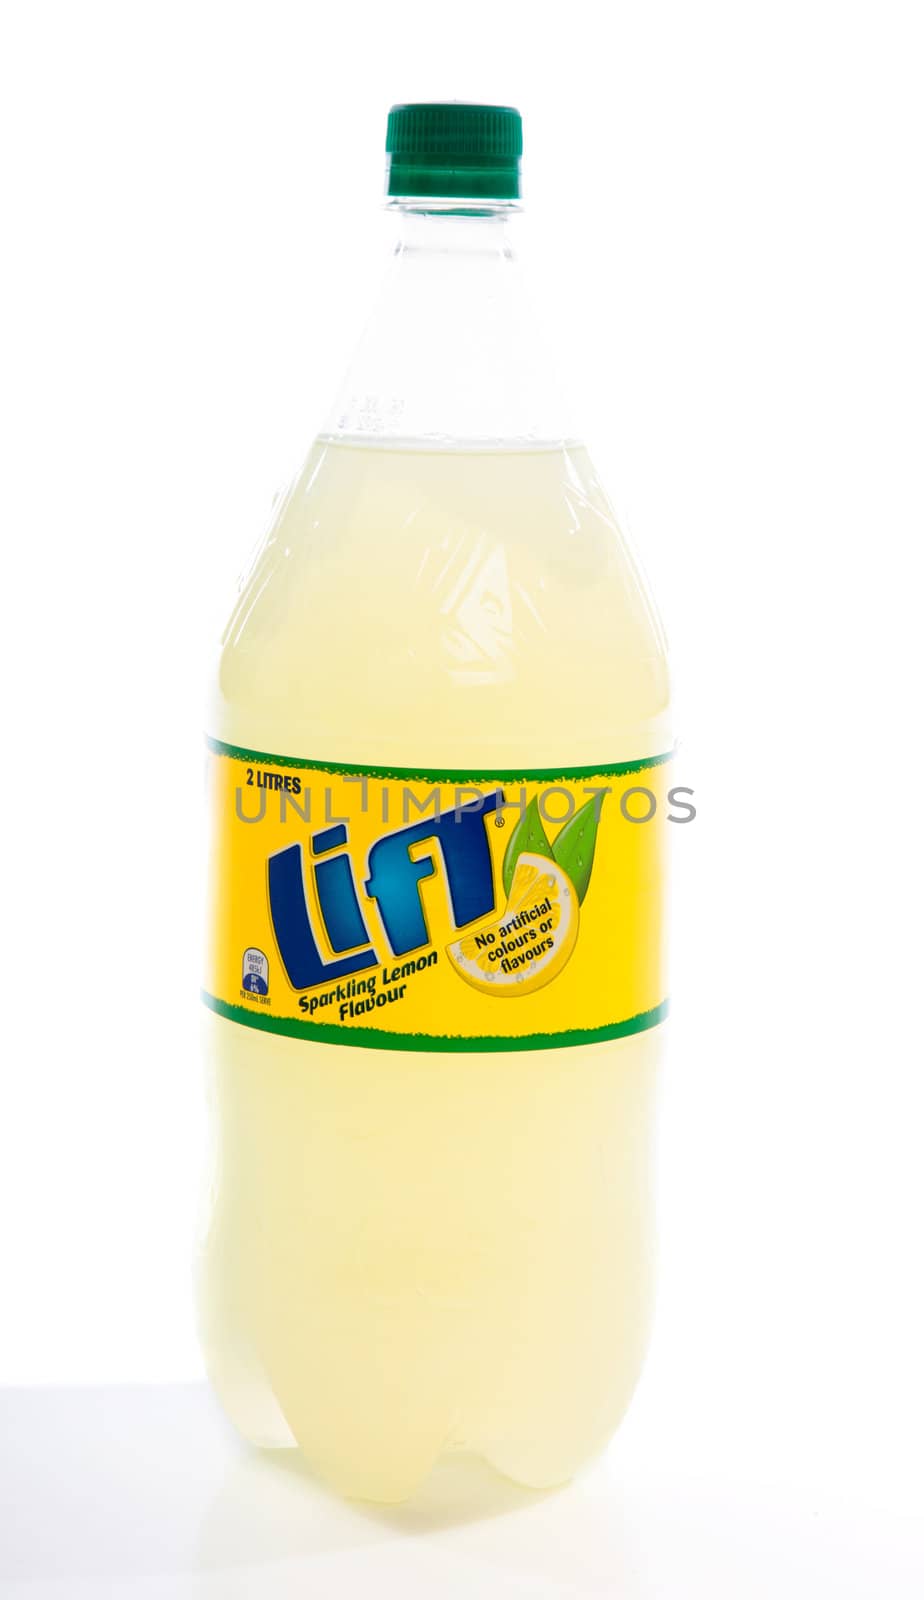 Bottle of Lift 2 litre - carbonated lemon flavoured drink, softdrink, fizzy drink.  Made by the Coca Cola company.